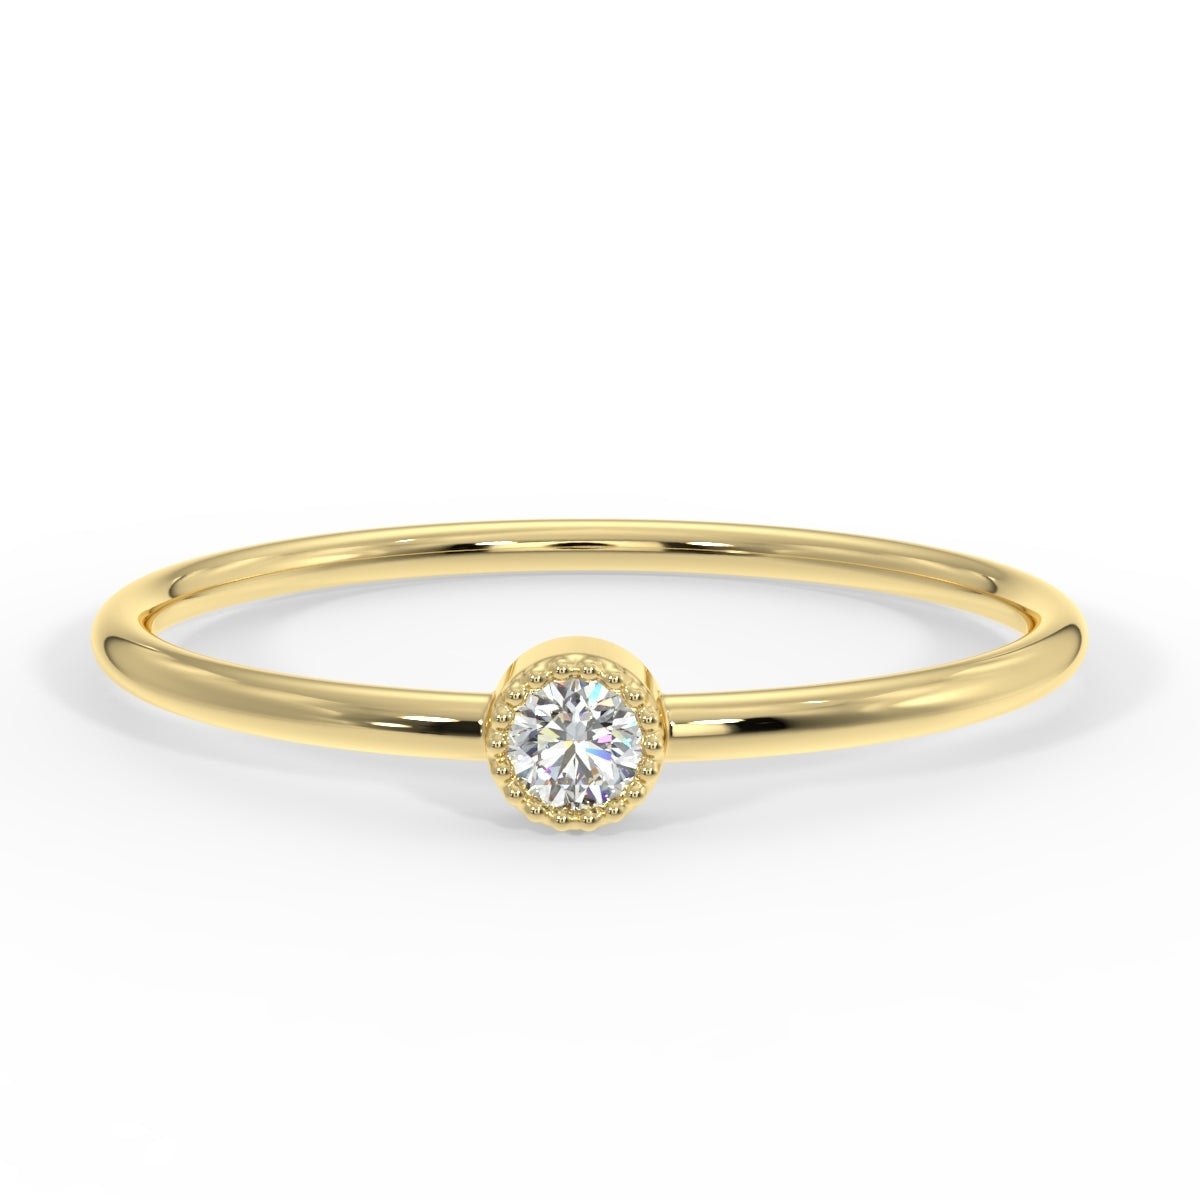 SIMPLE & CHIC MINIMALIST SOLITAIRE RING